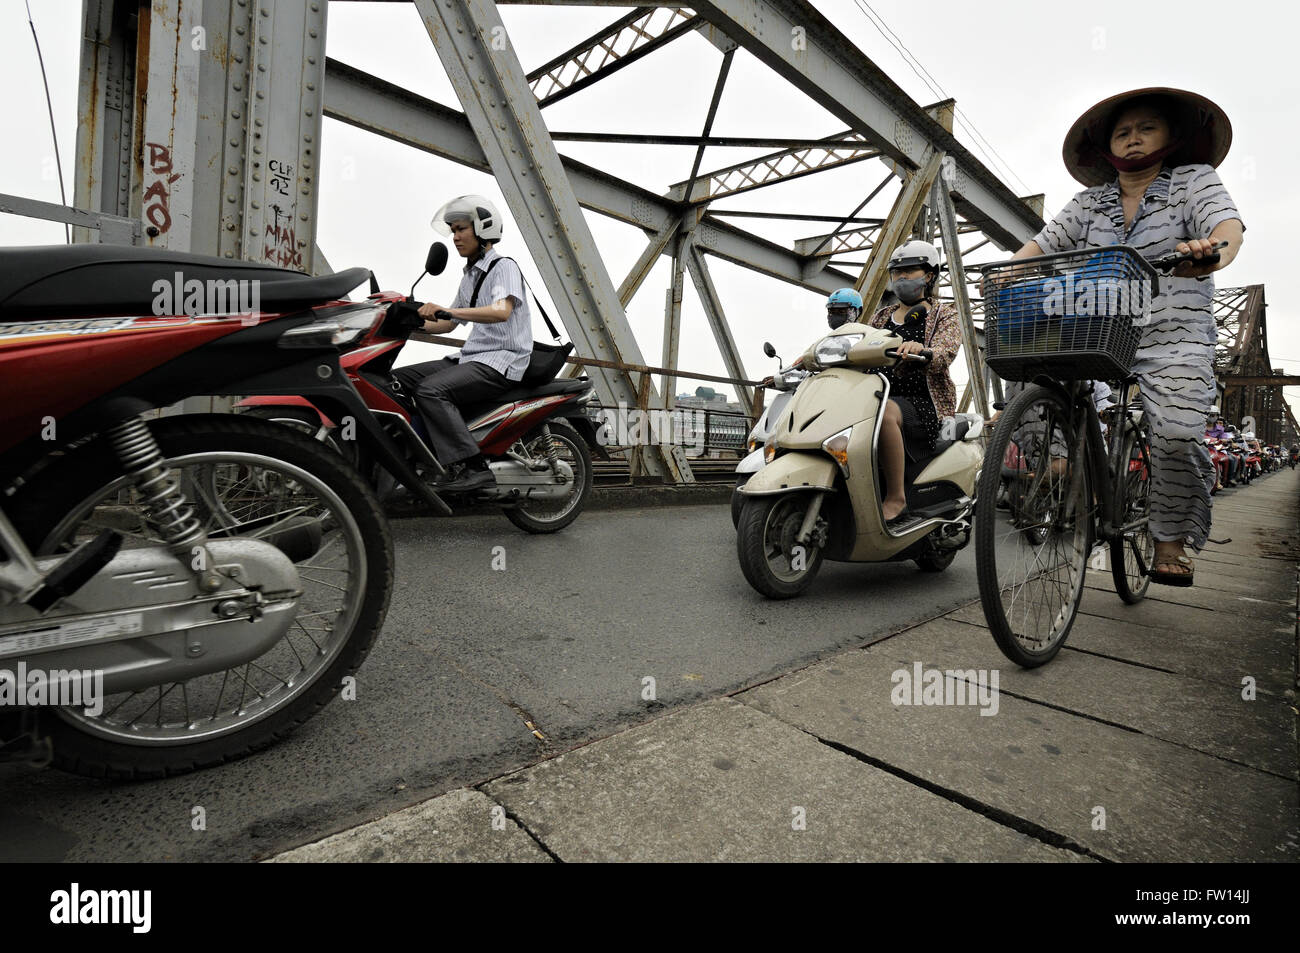 Woman with typical conical hat riding a bicycle and many other people riding scooters on Long Bien bridge in Hanoi, Vietnam Stock Photo